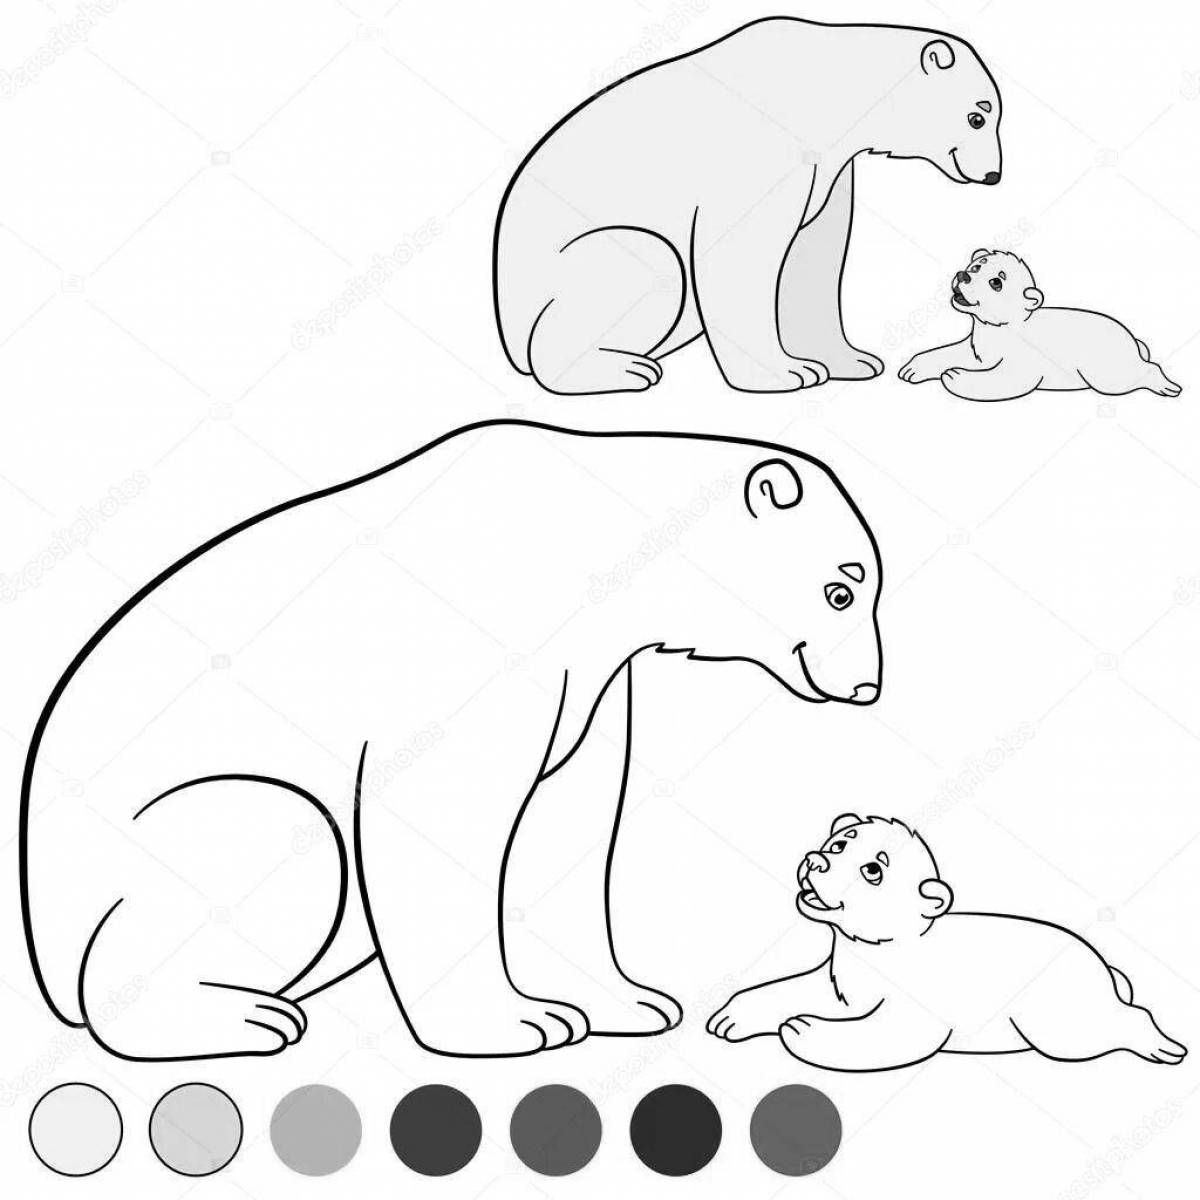 Coloring page of an adorable polar bear with a cub